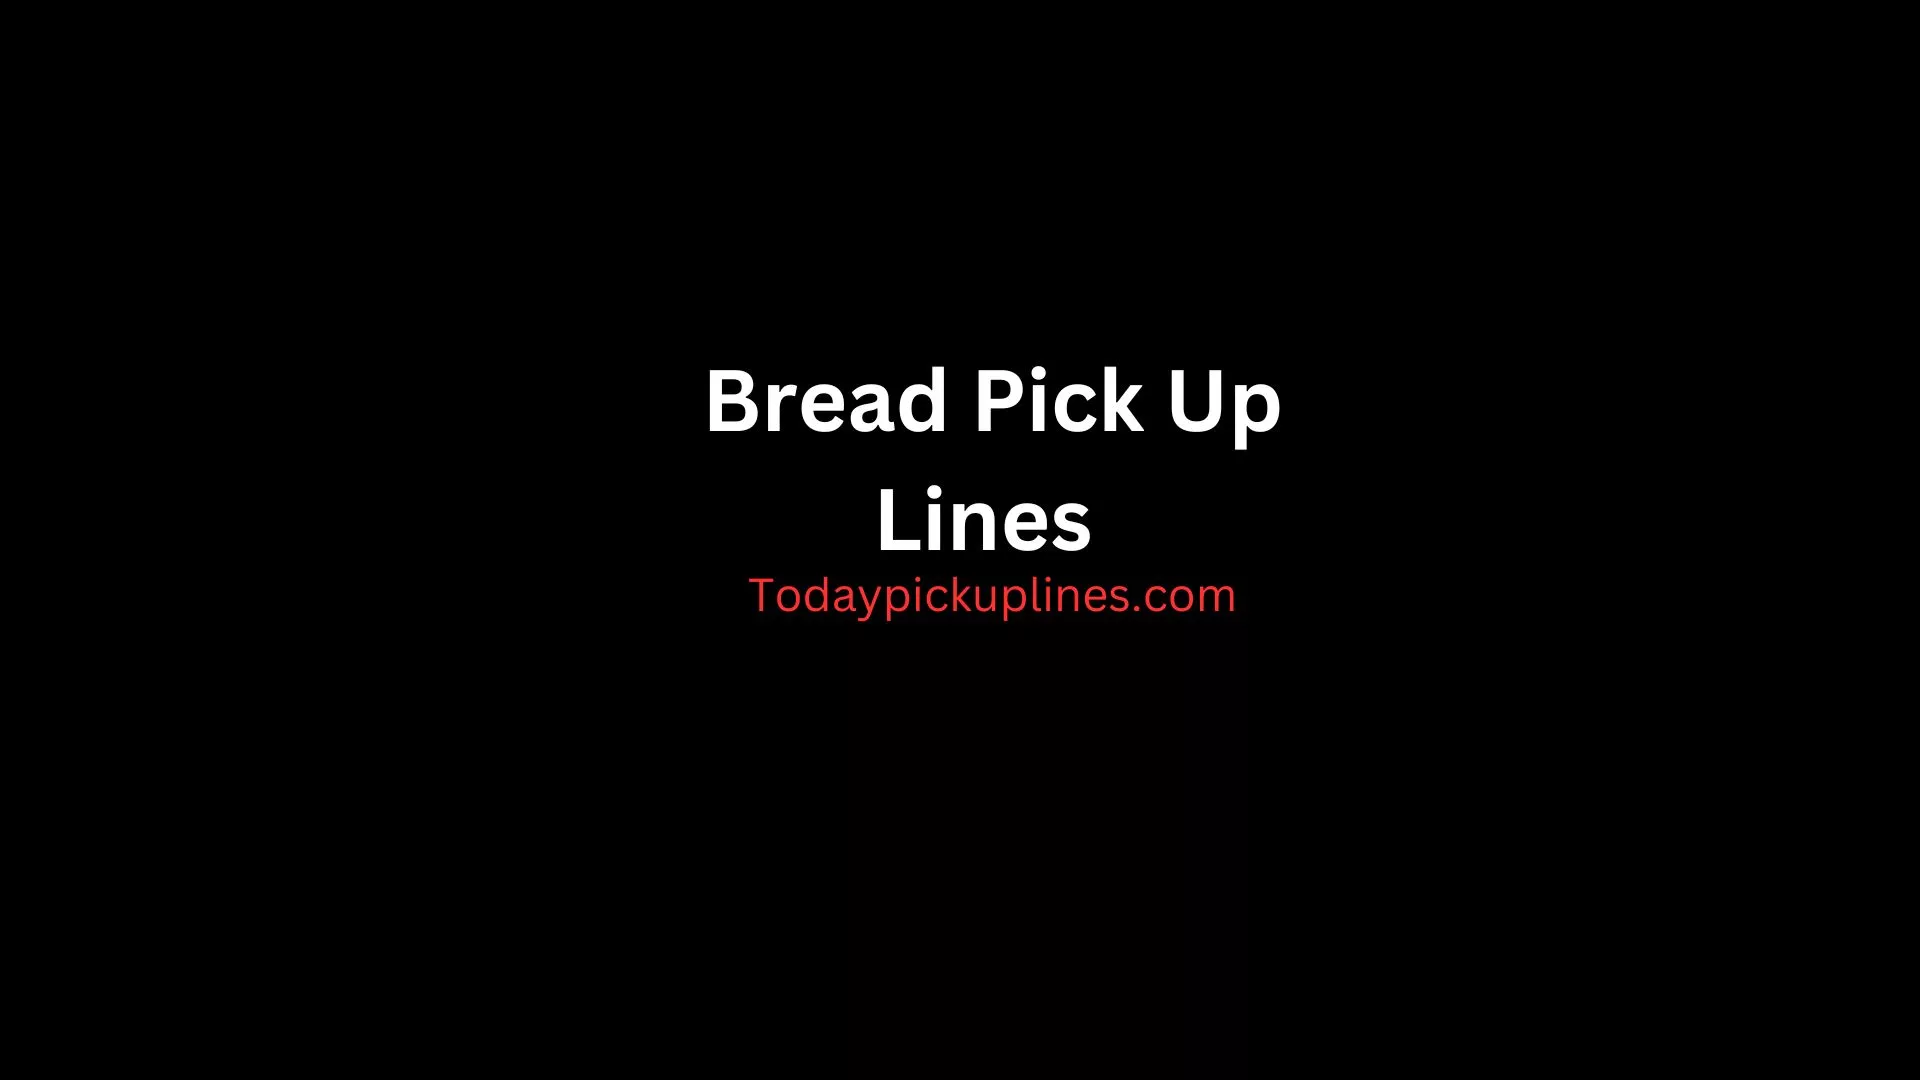 Bread Pick Up Lines